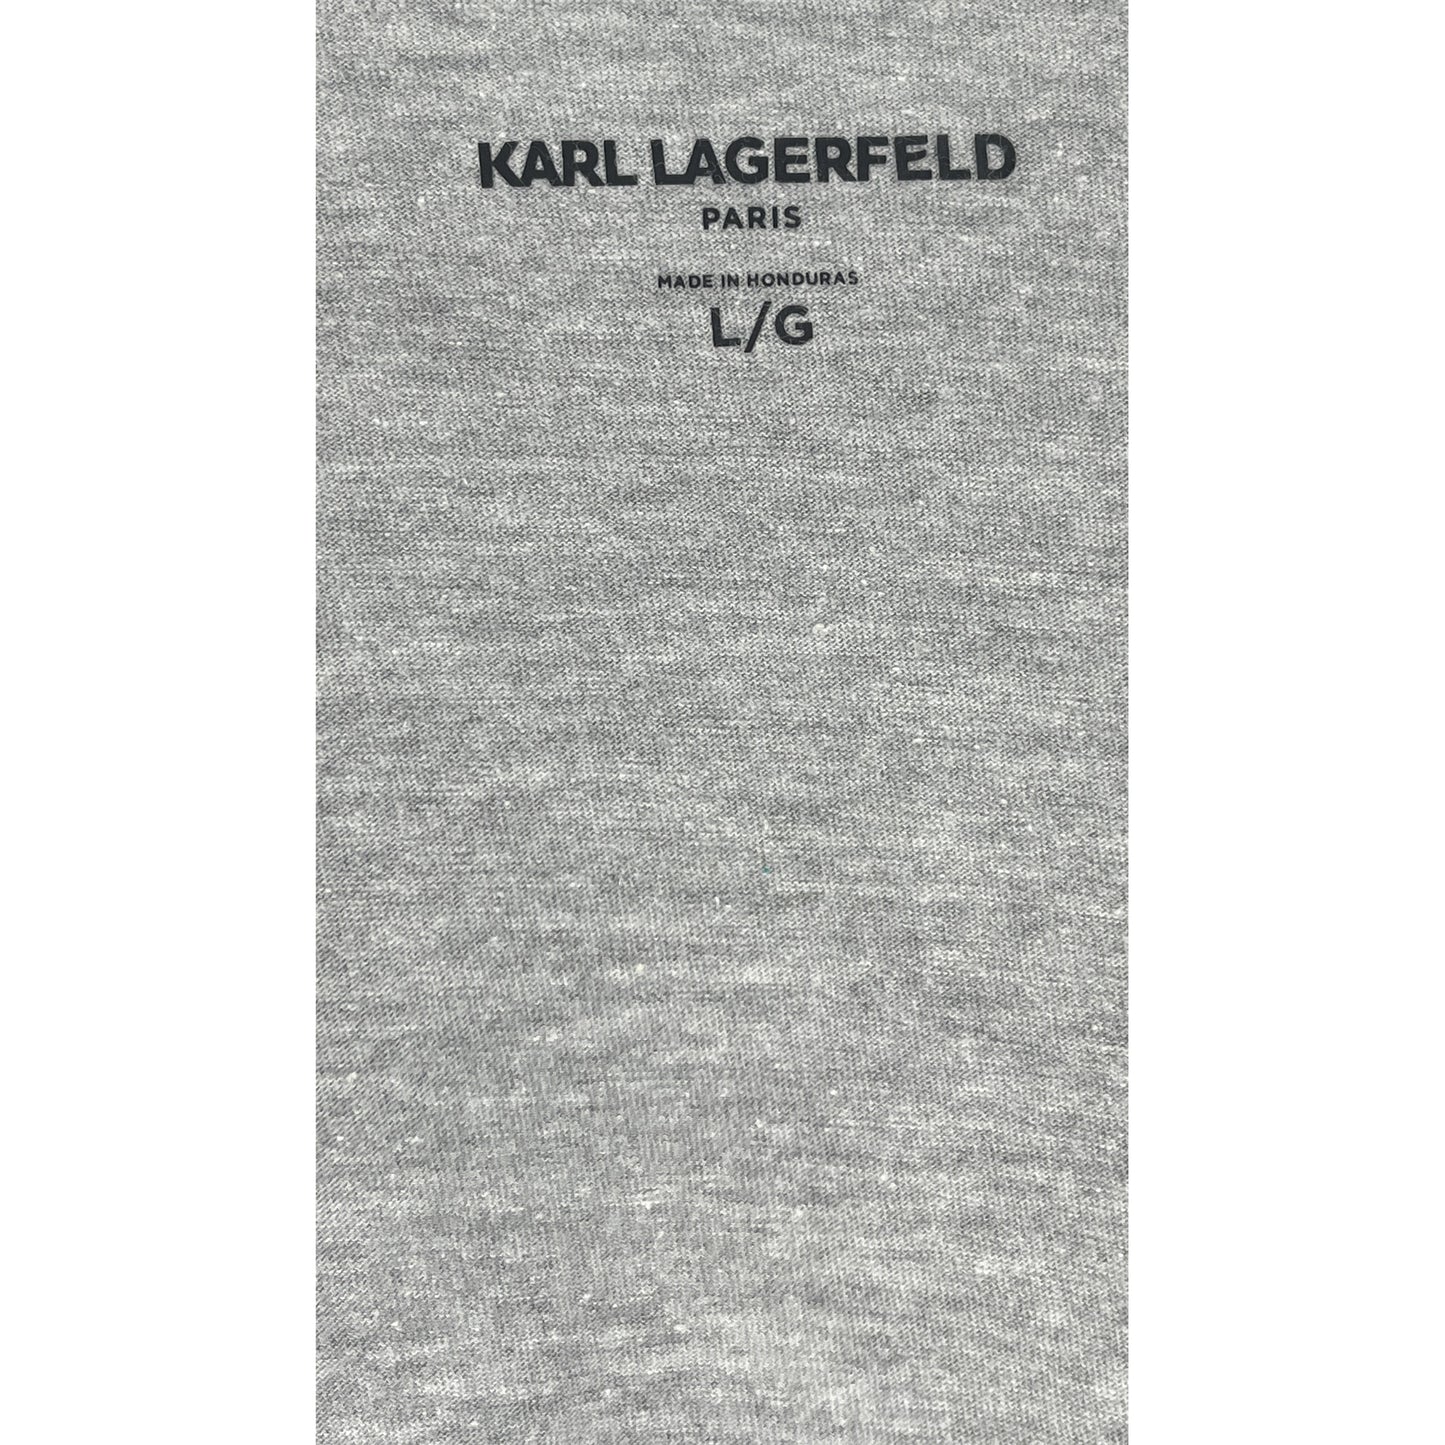 Karl Lagerfeld Graphic Tee Top Gray Size L SKU 000413